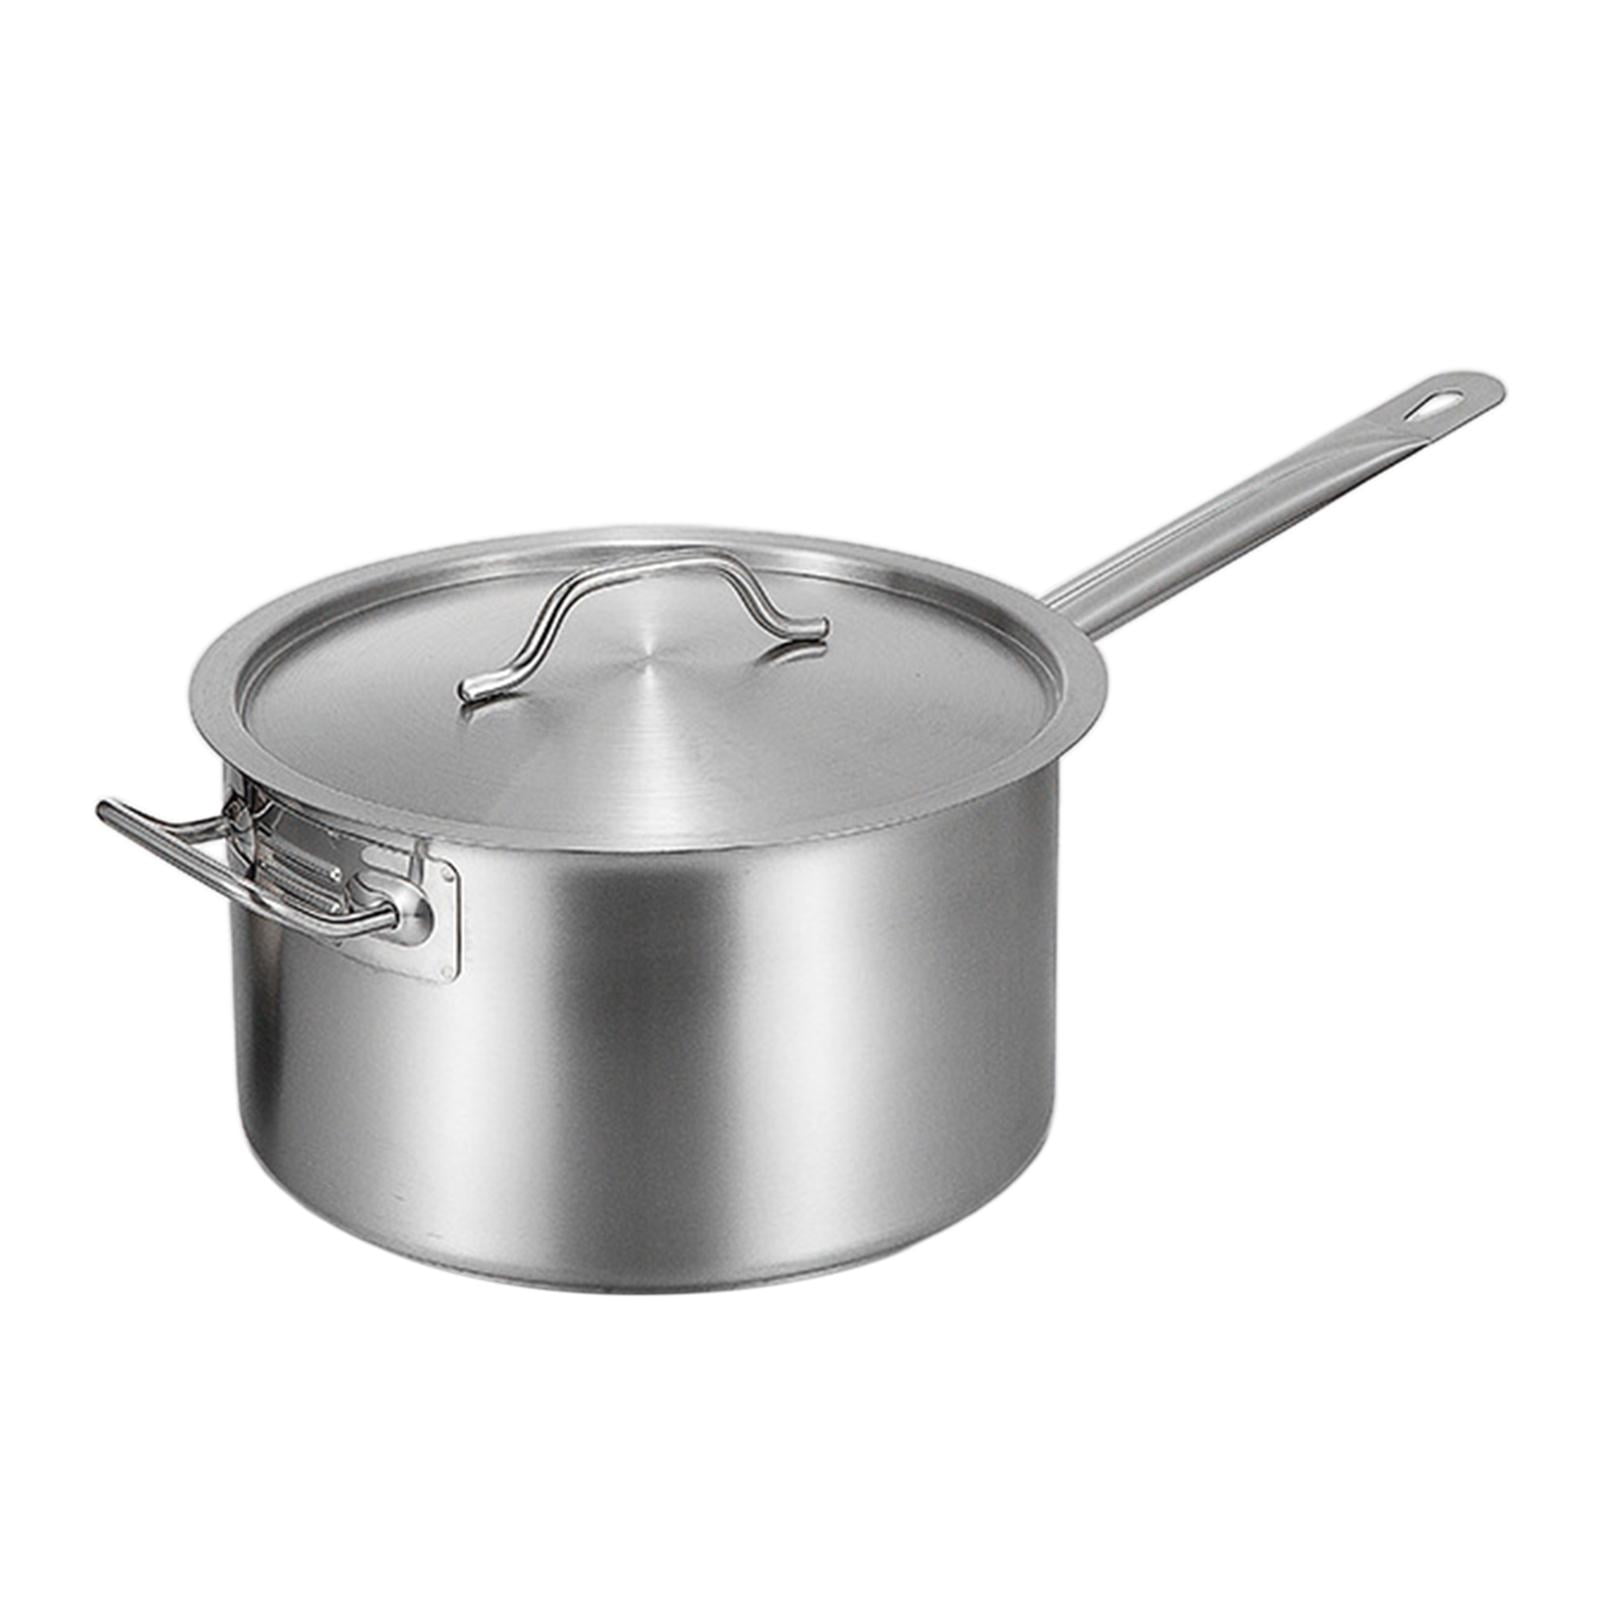 Stainless Steel Saucepan with Lid, Sauce Cooking Pot Milk Pan Professional  Small Sauce Pan with Egg Steamer Rack for Kitchen Steaming Food